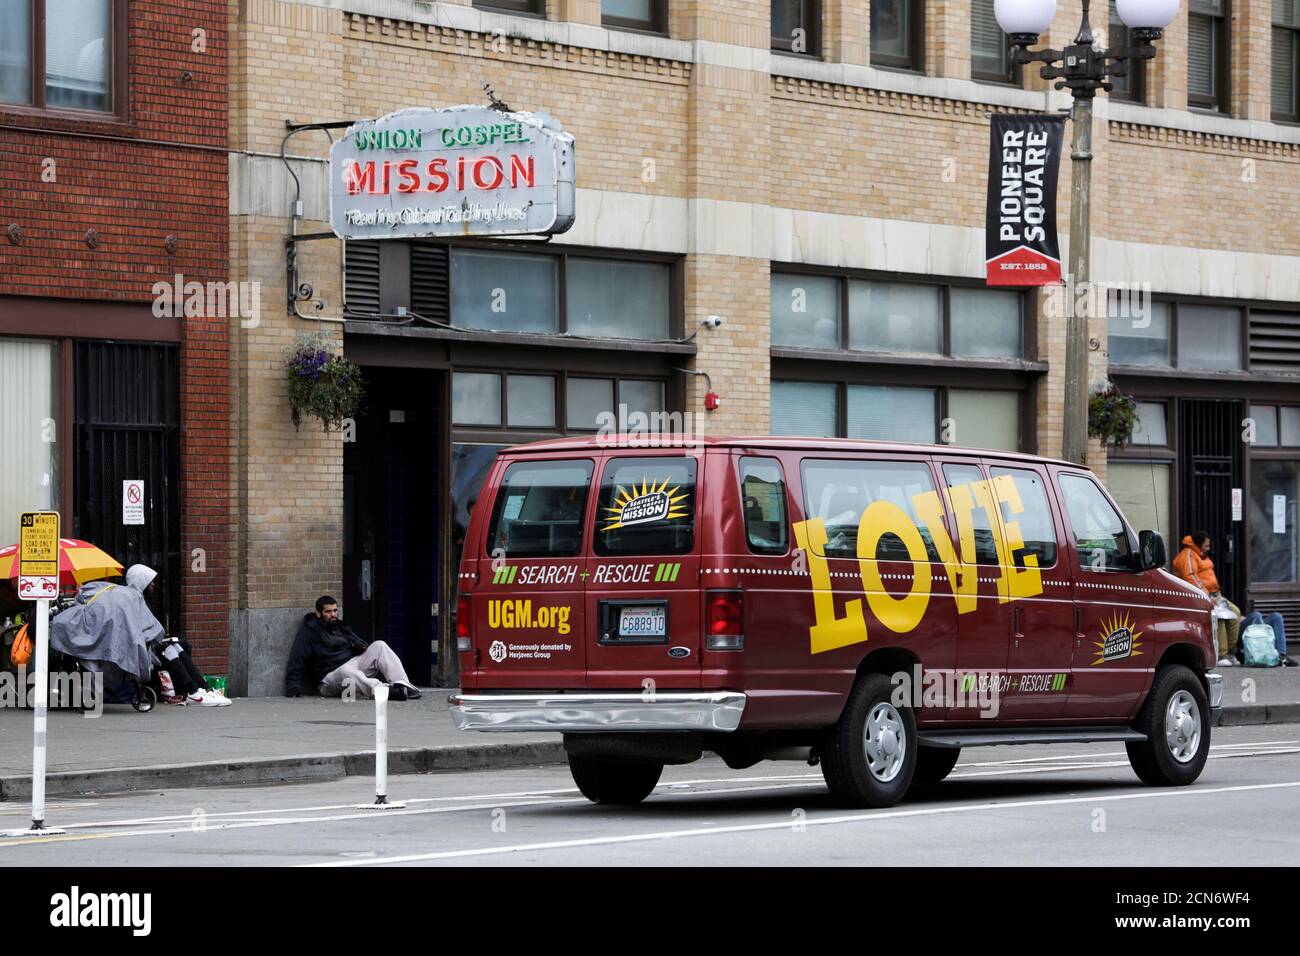 A van is pictured outside the Union Gospel Mission Men's Shelter in Pioneer Square, after a confirmed case of COVID-19 at their Riverton Place location led to a 14-day lockdown at all Mission Program sites, according to their website, as efforts continue to help slow the spread of coronavirus disease (COVID-19) in Seattle, Washington, U.S. March 28, 2020.  REUTERS/Jason Redmond Stock Photo